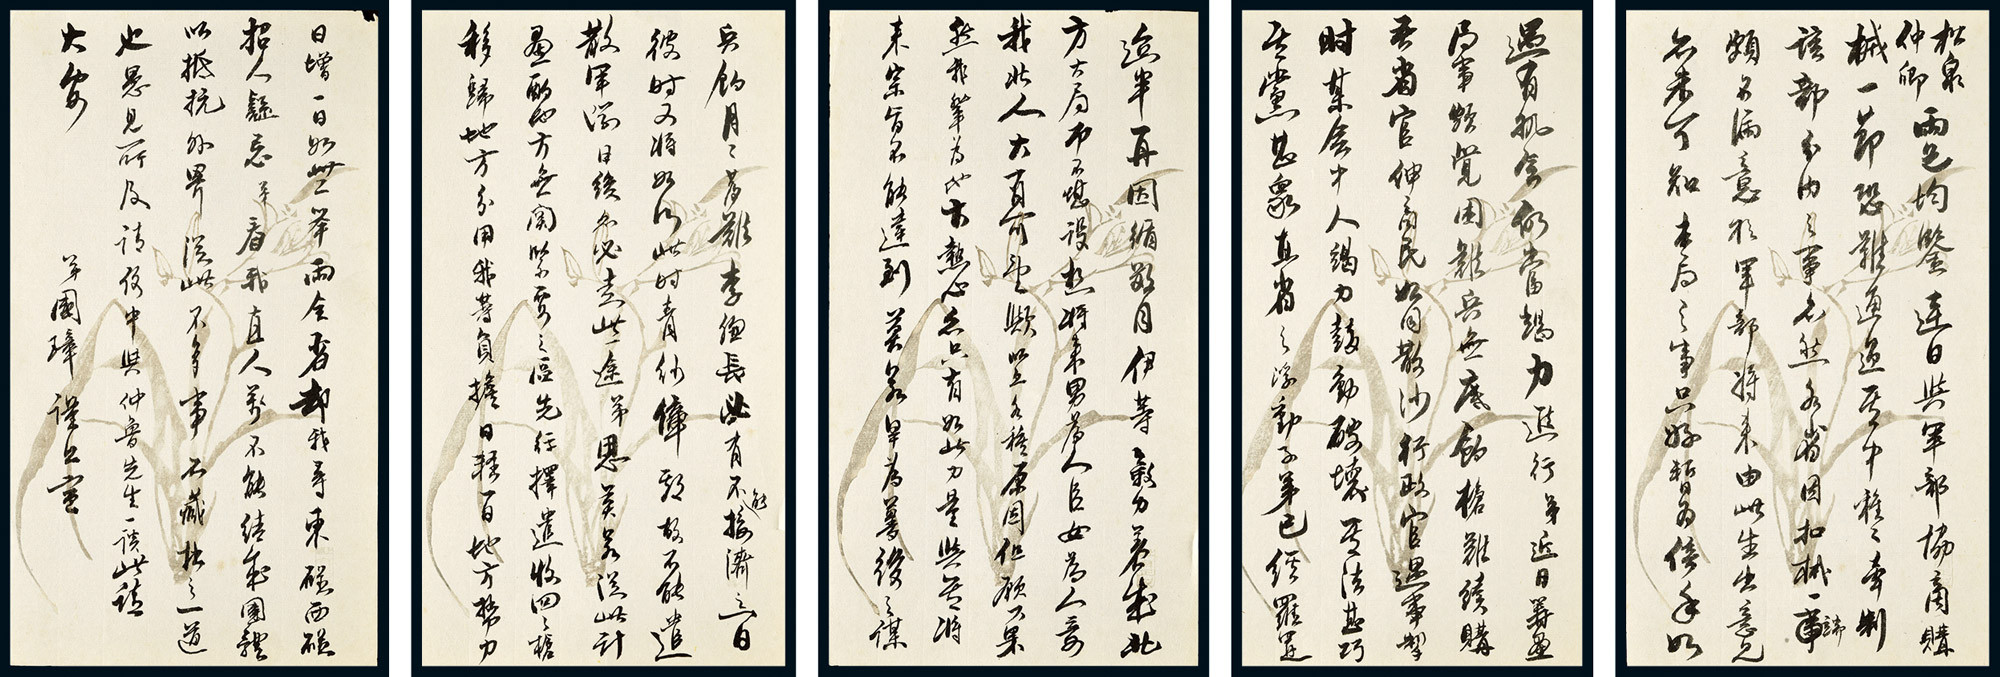 One letter of five pages to Ning Sung-chuan and Feng Chung-ching by Feng Kuo-chang